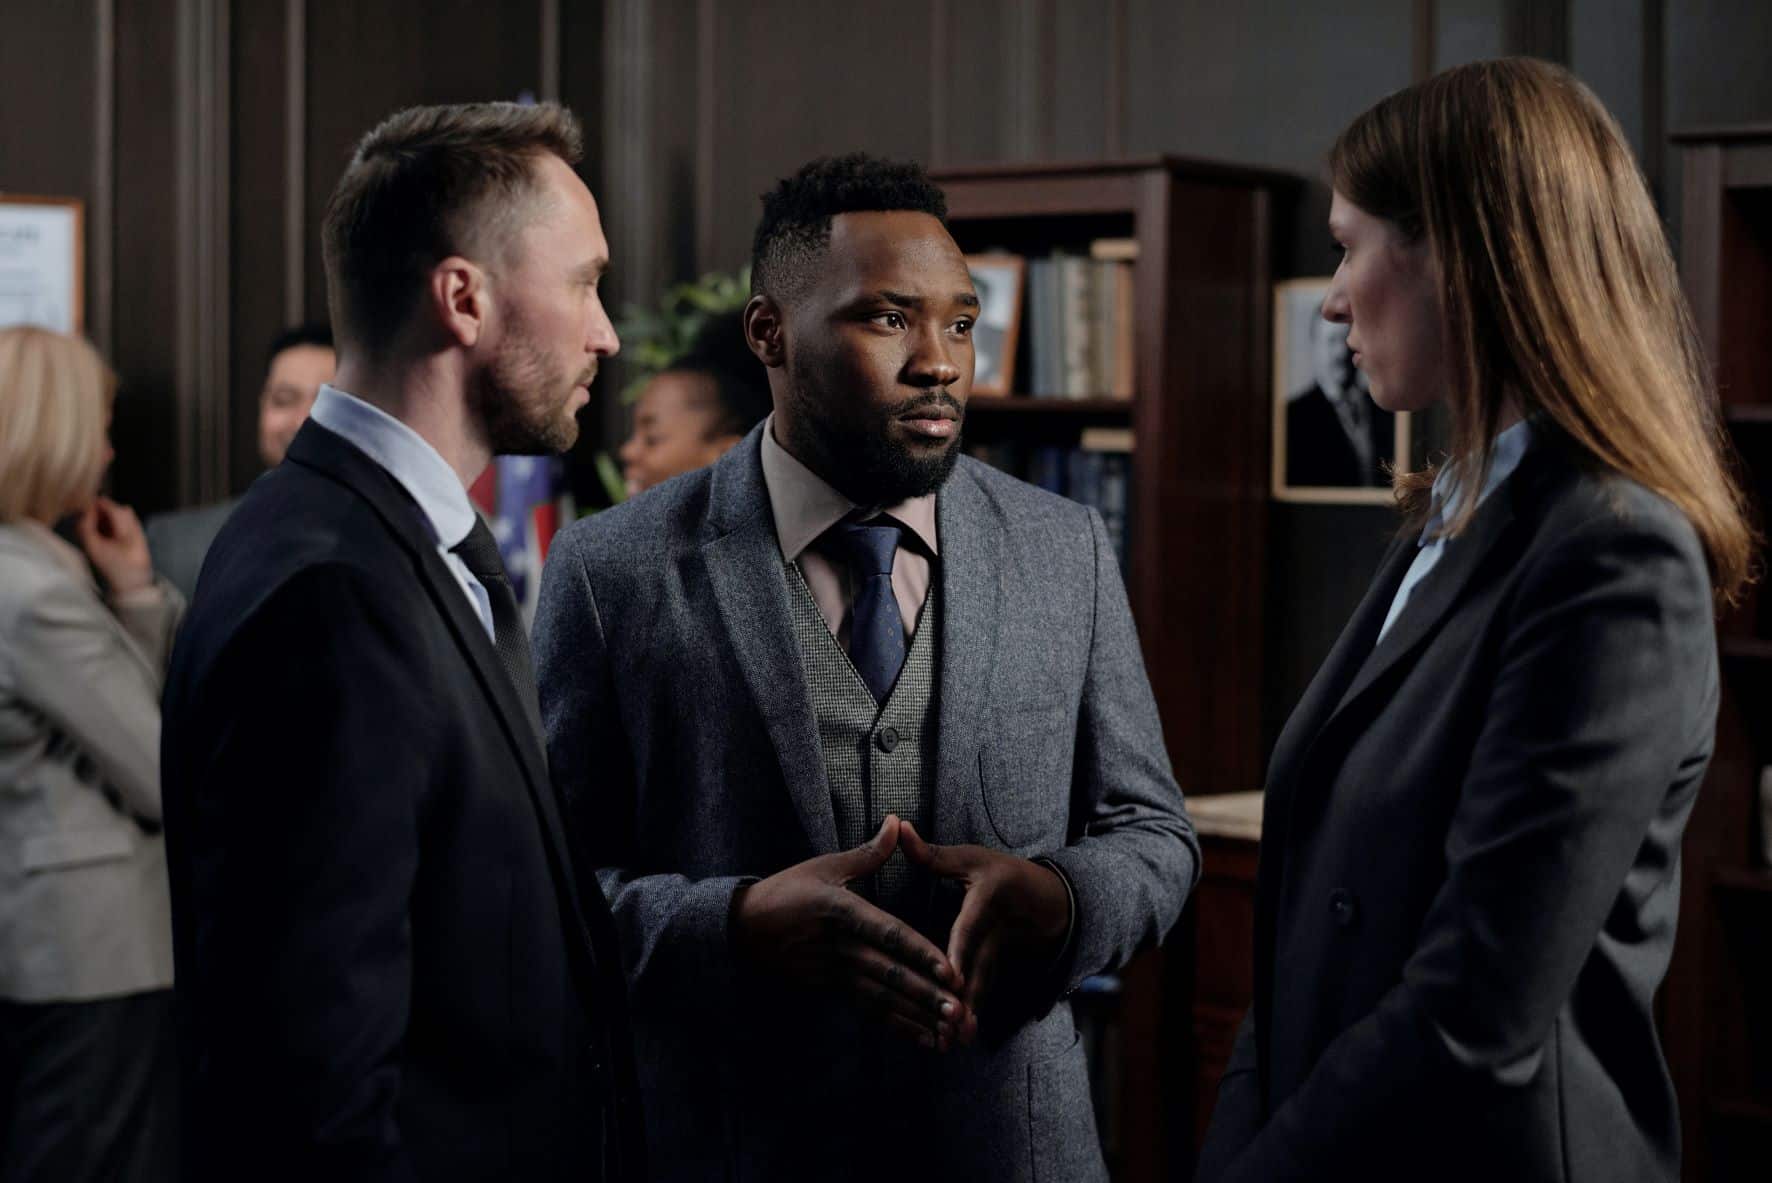 group of three people in suits having a conversation